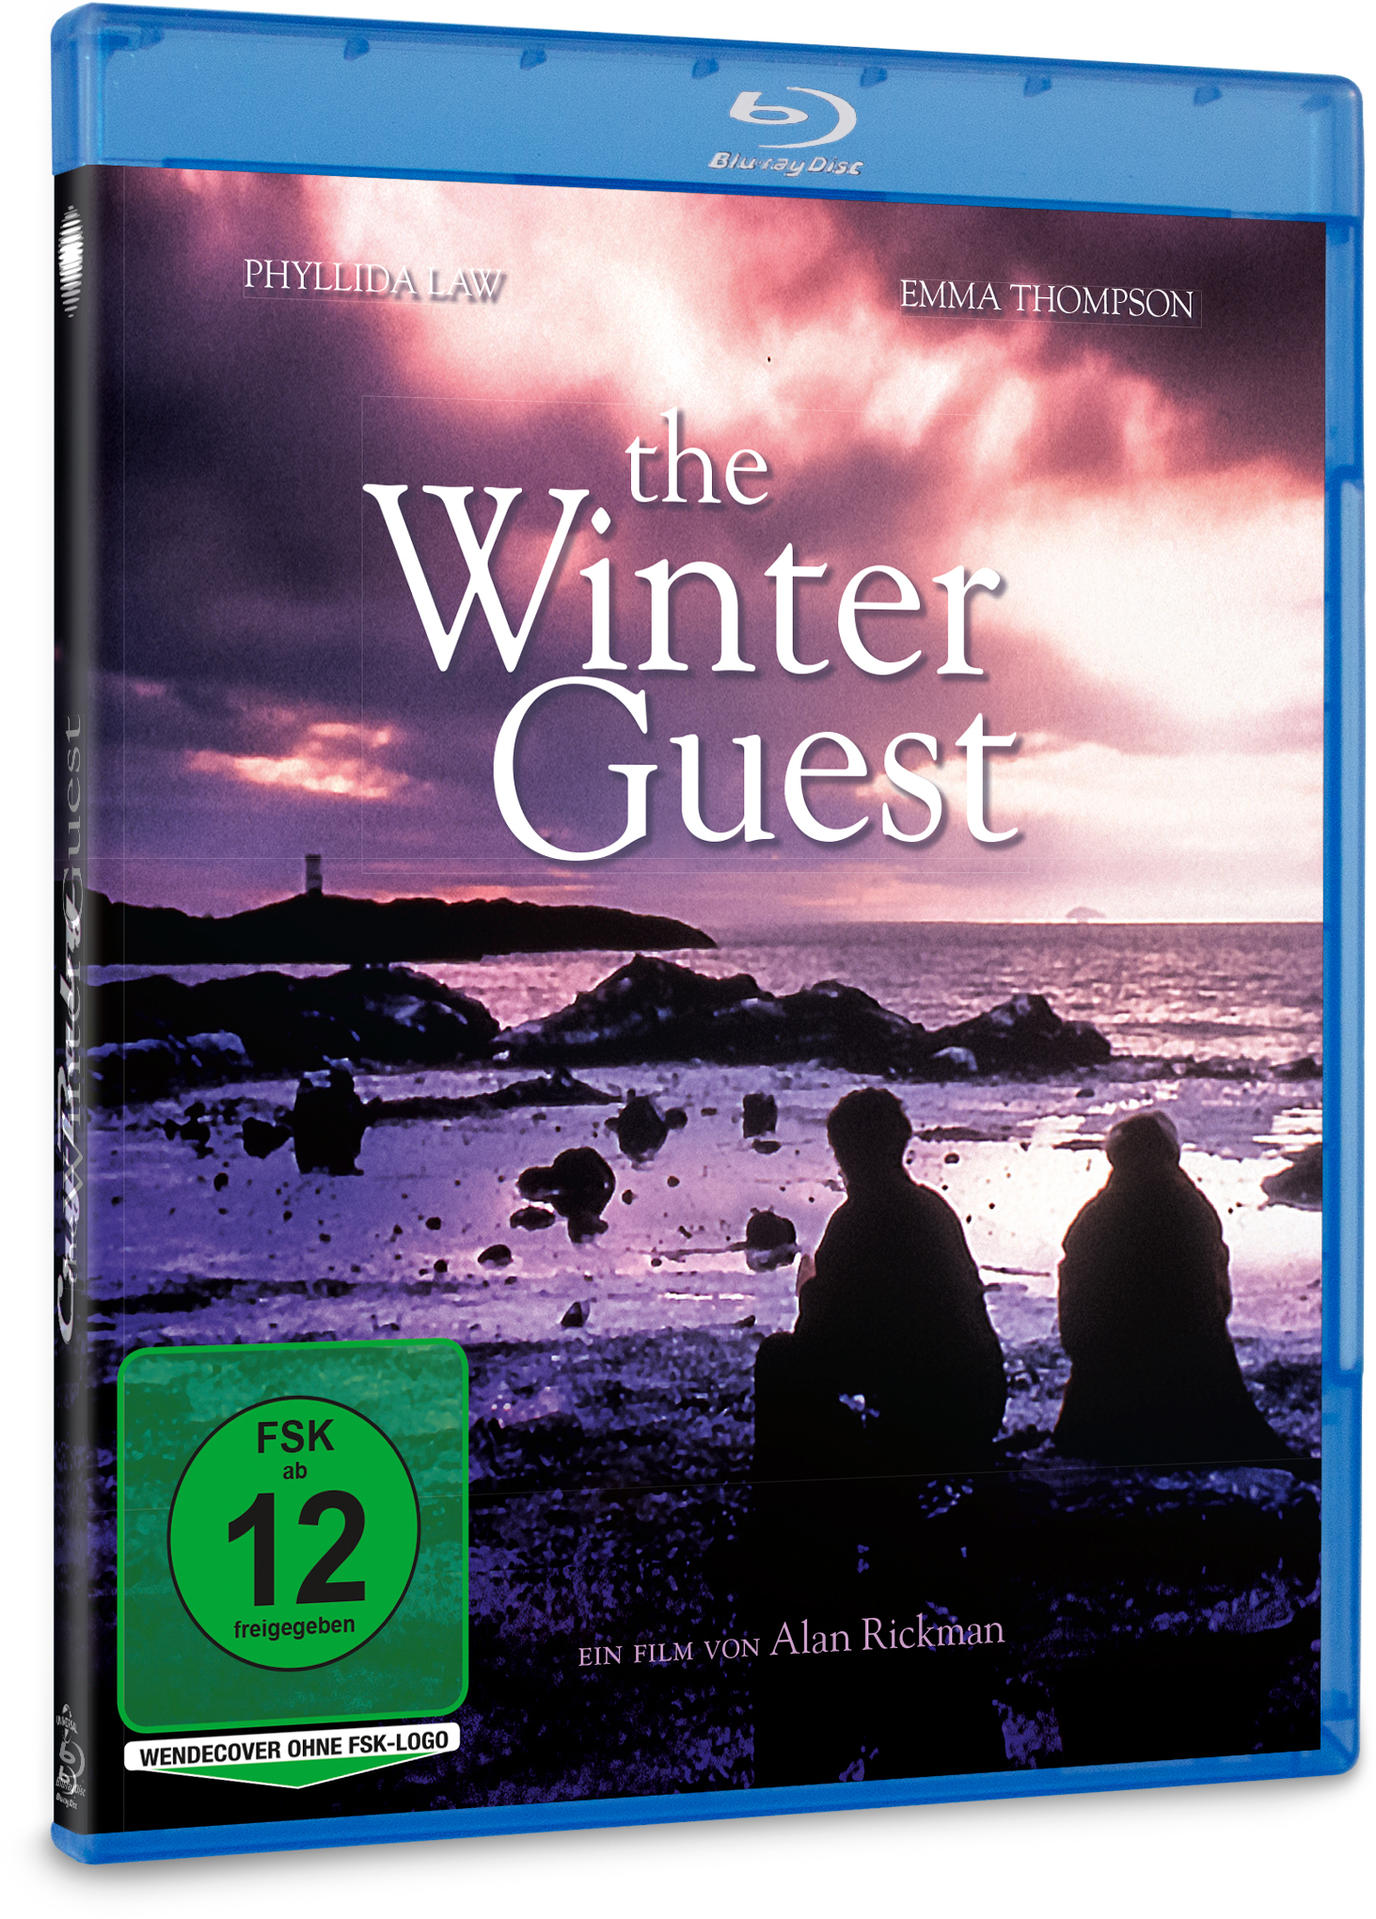 Guest Winter Blu-ray The